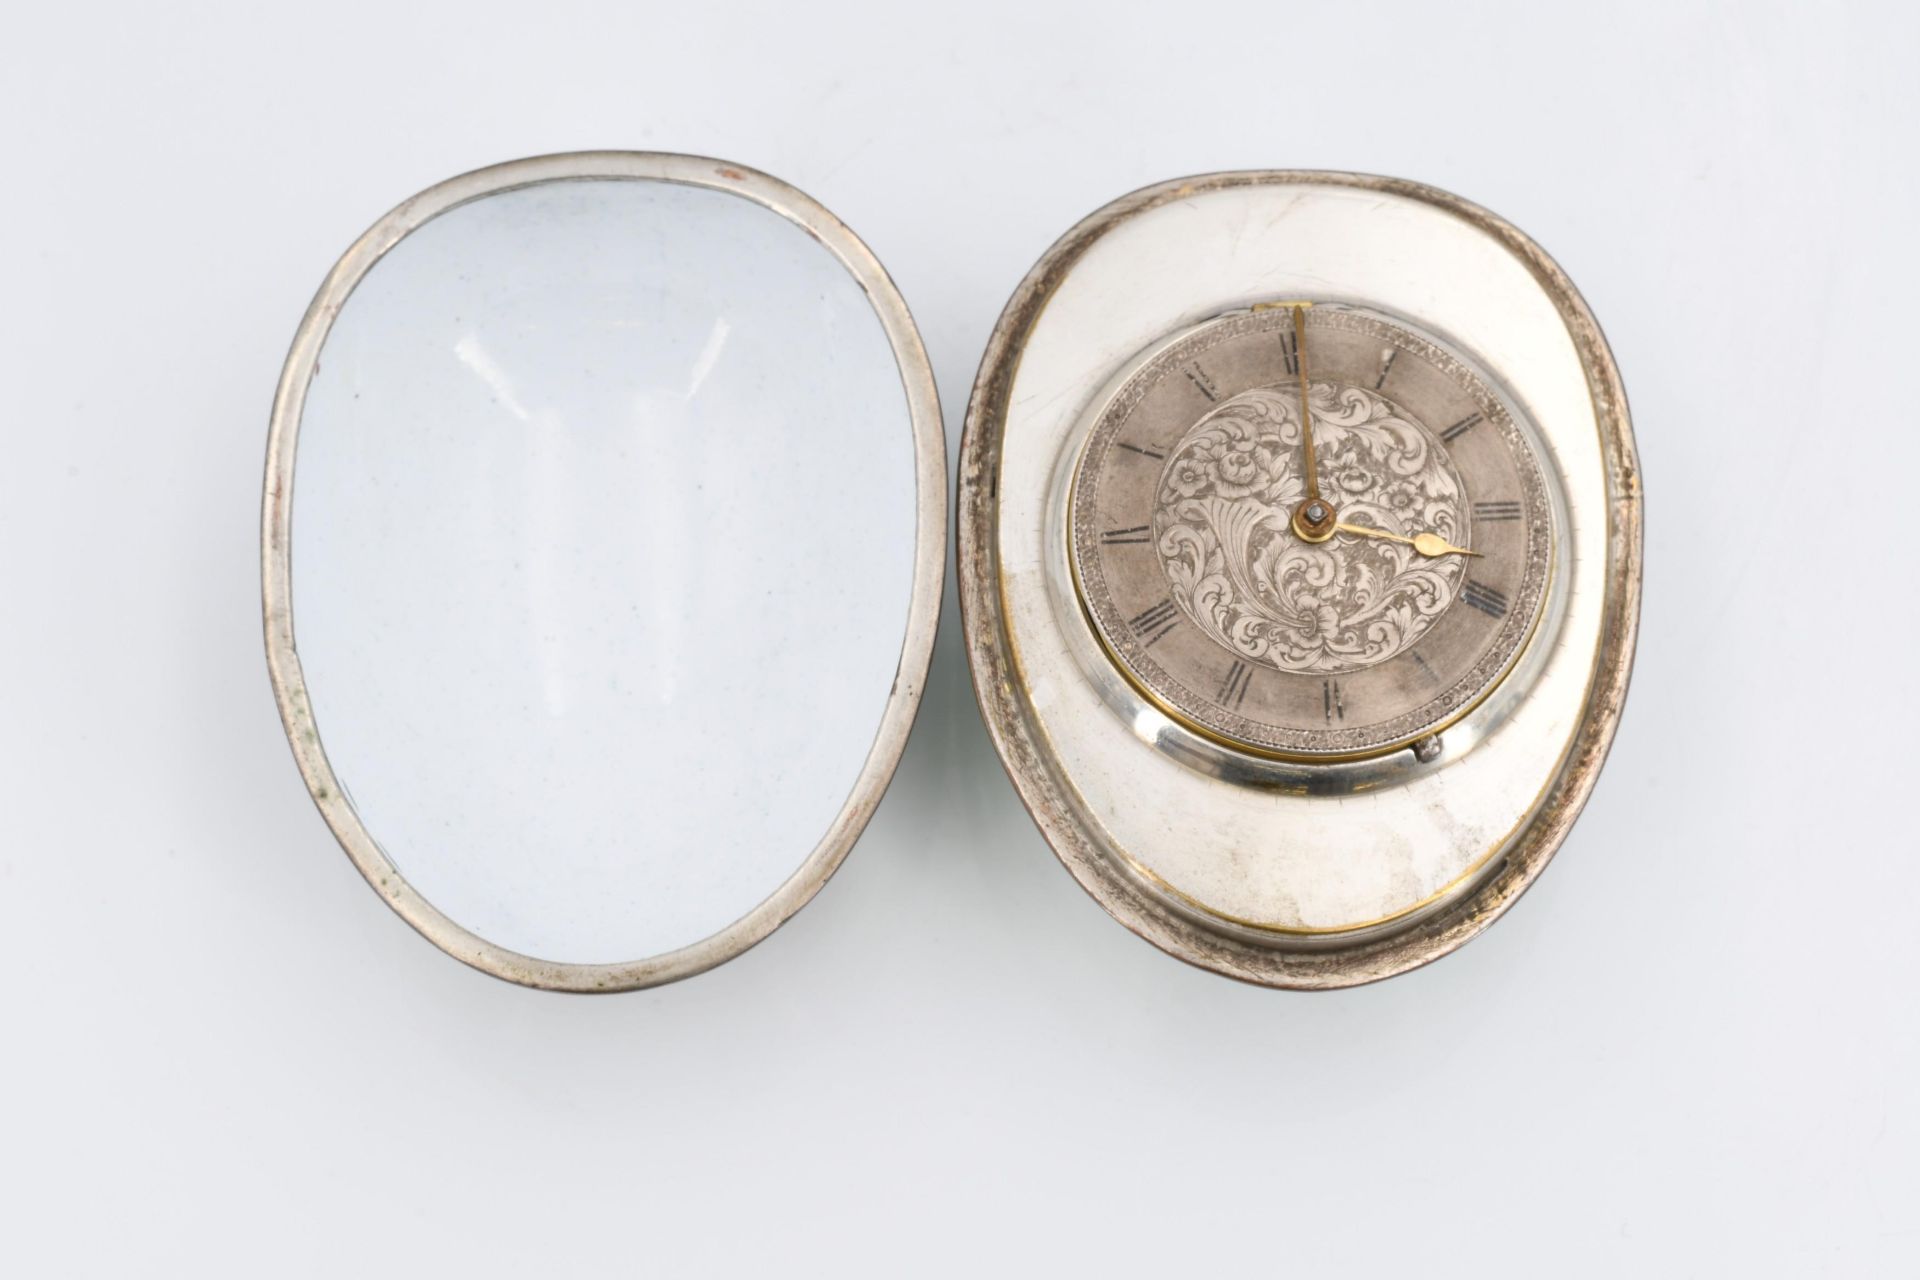 Small table clock in egg-shaped case with amoretto - Image 5 of 8